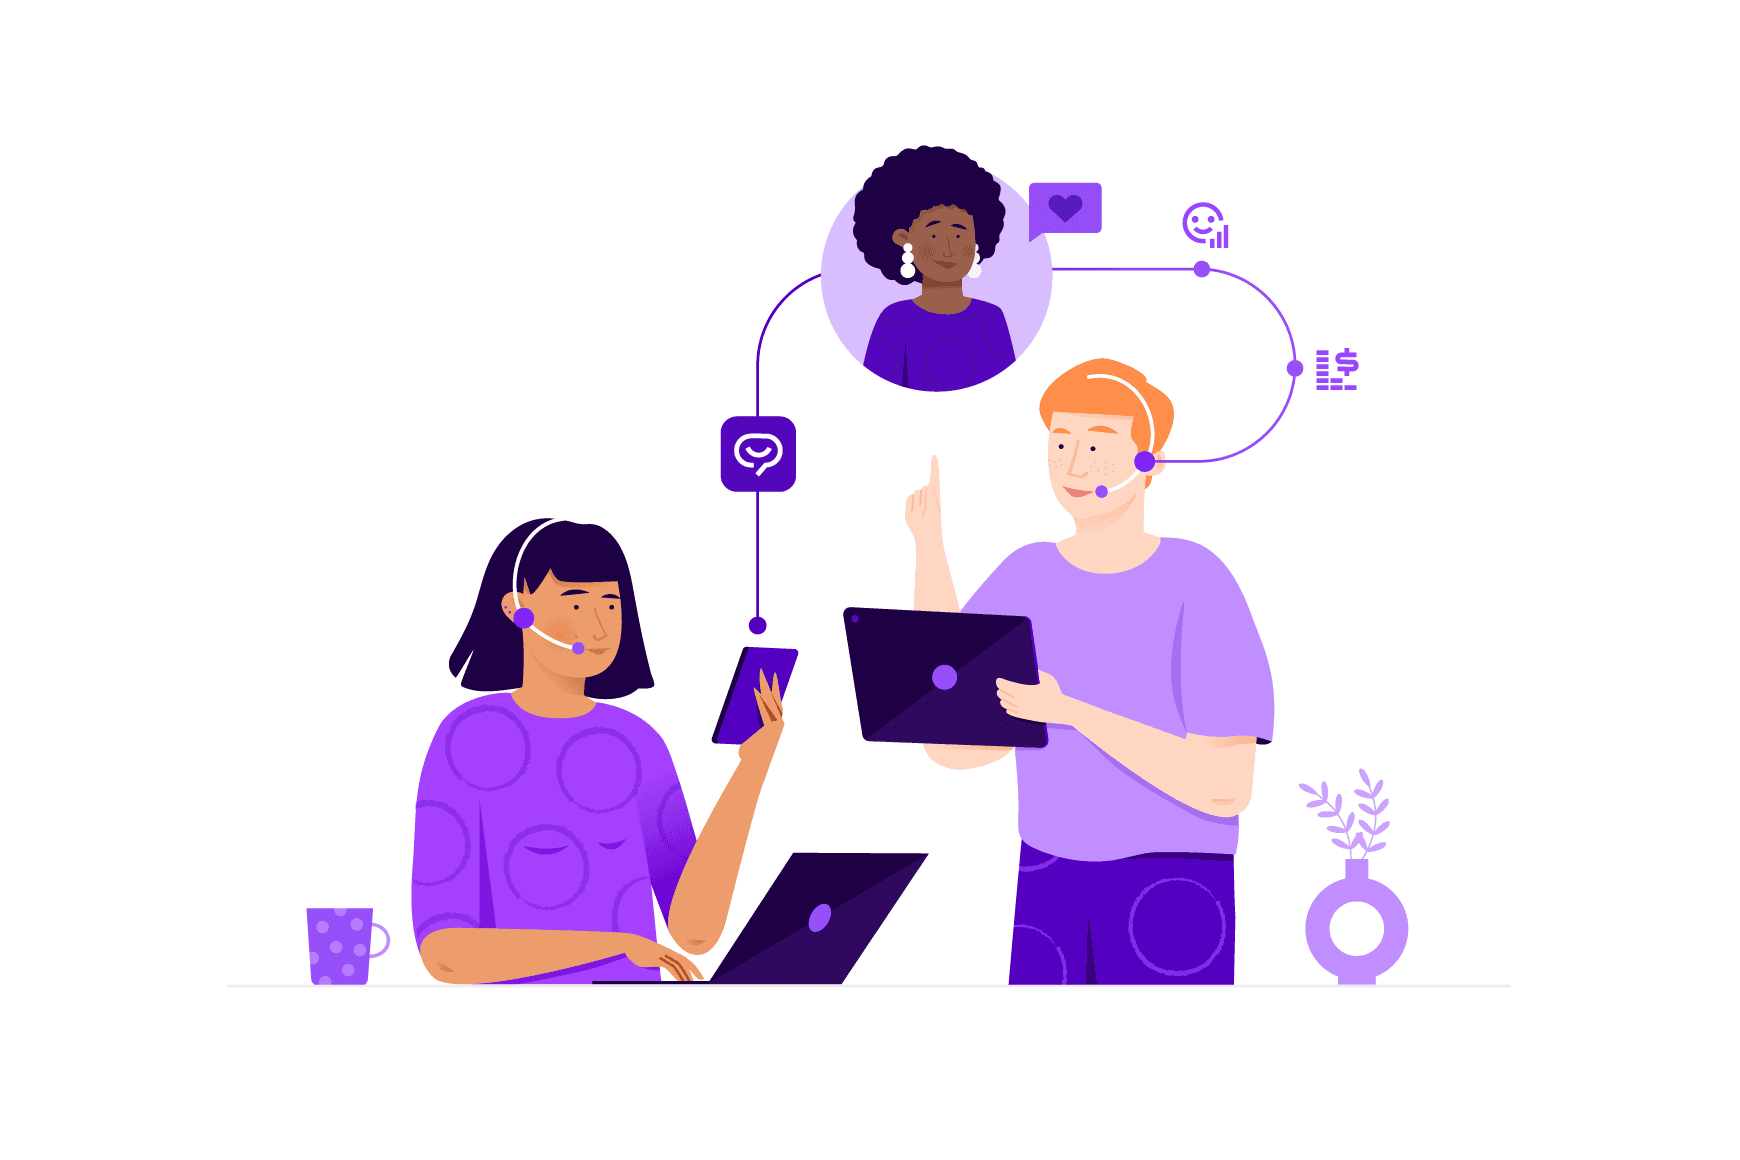 An illustration representing three people interacting through phone and digital channels.